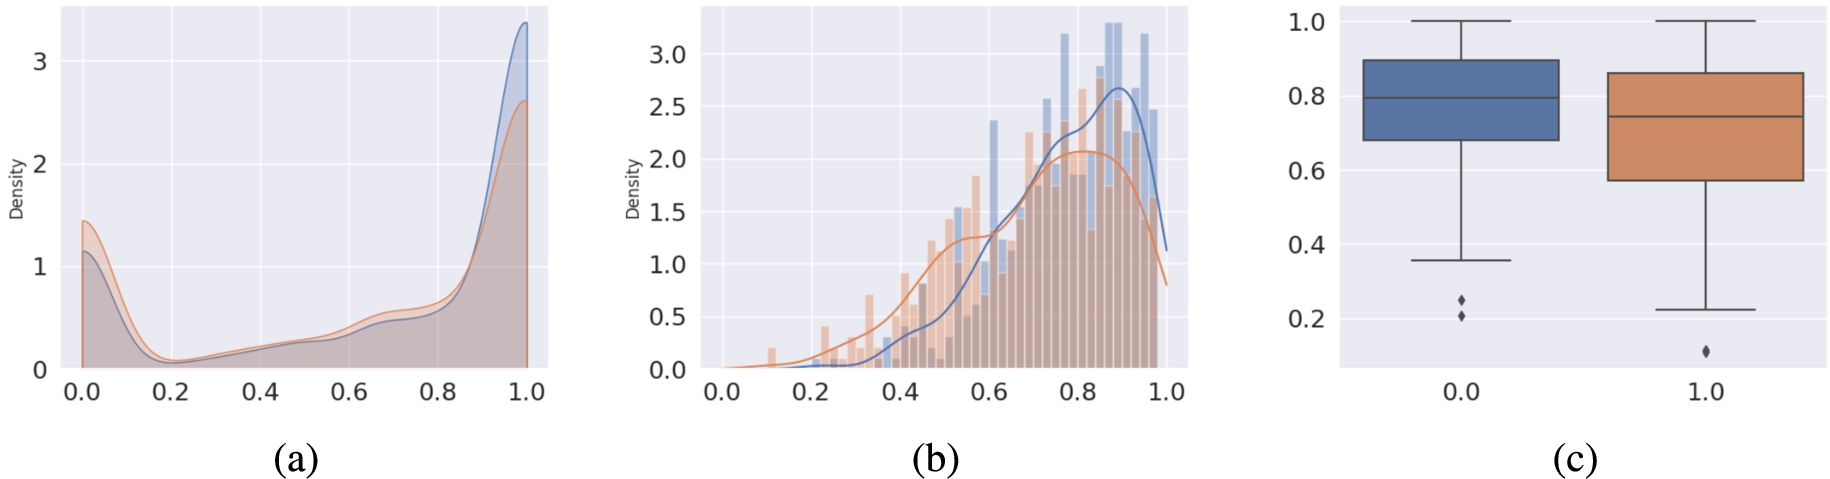 F1 scores on test fragment of the ChEBI500 dataset. (a): Kernel density diagram based on the molecules. (b): Histogram diagram based on the classes. (c): Boxplots for the F1 scores of all 500 classes. A statistical test comparing the two class-wise F1 scores distributions yields a p-value of less than 0.001, indicating the distributions significantly differ and that Electra (blue) outperforms the LSTM model (red).